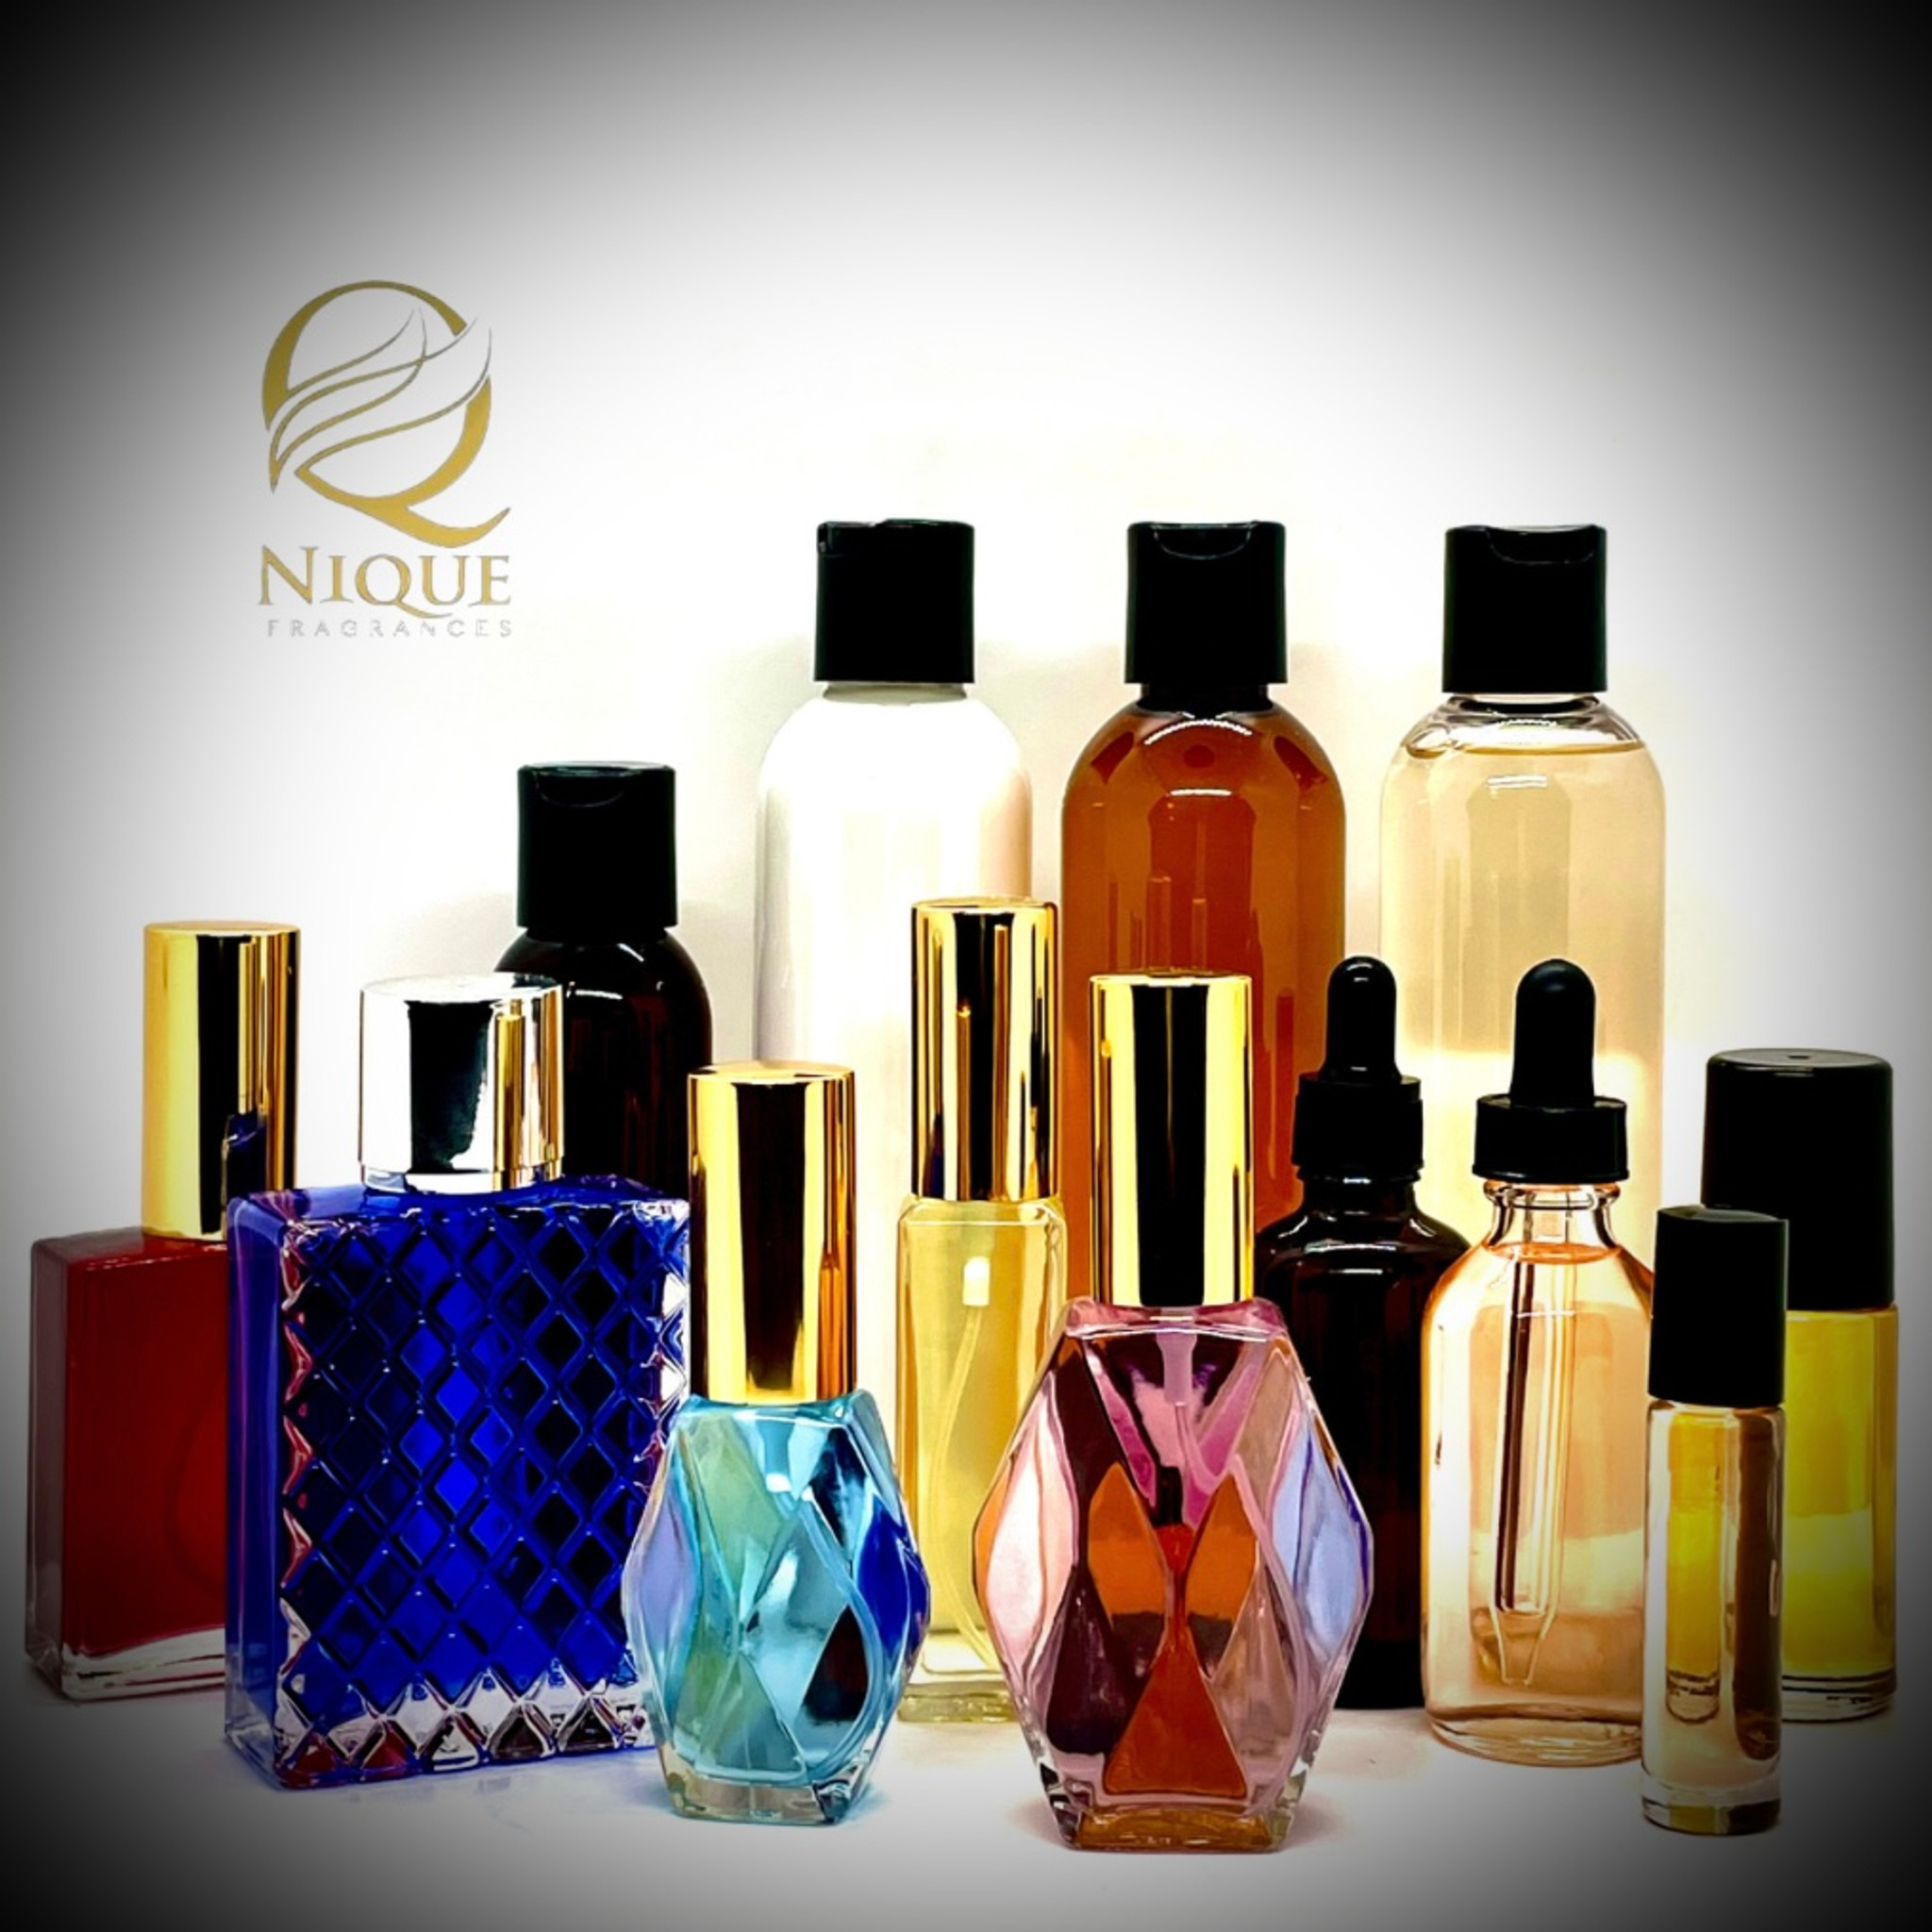 Perfume Oil Inspired by - Louis Vuitton Ombre Nomade Type